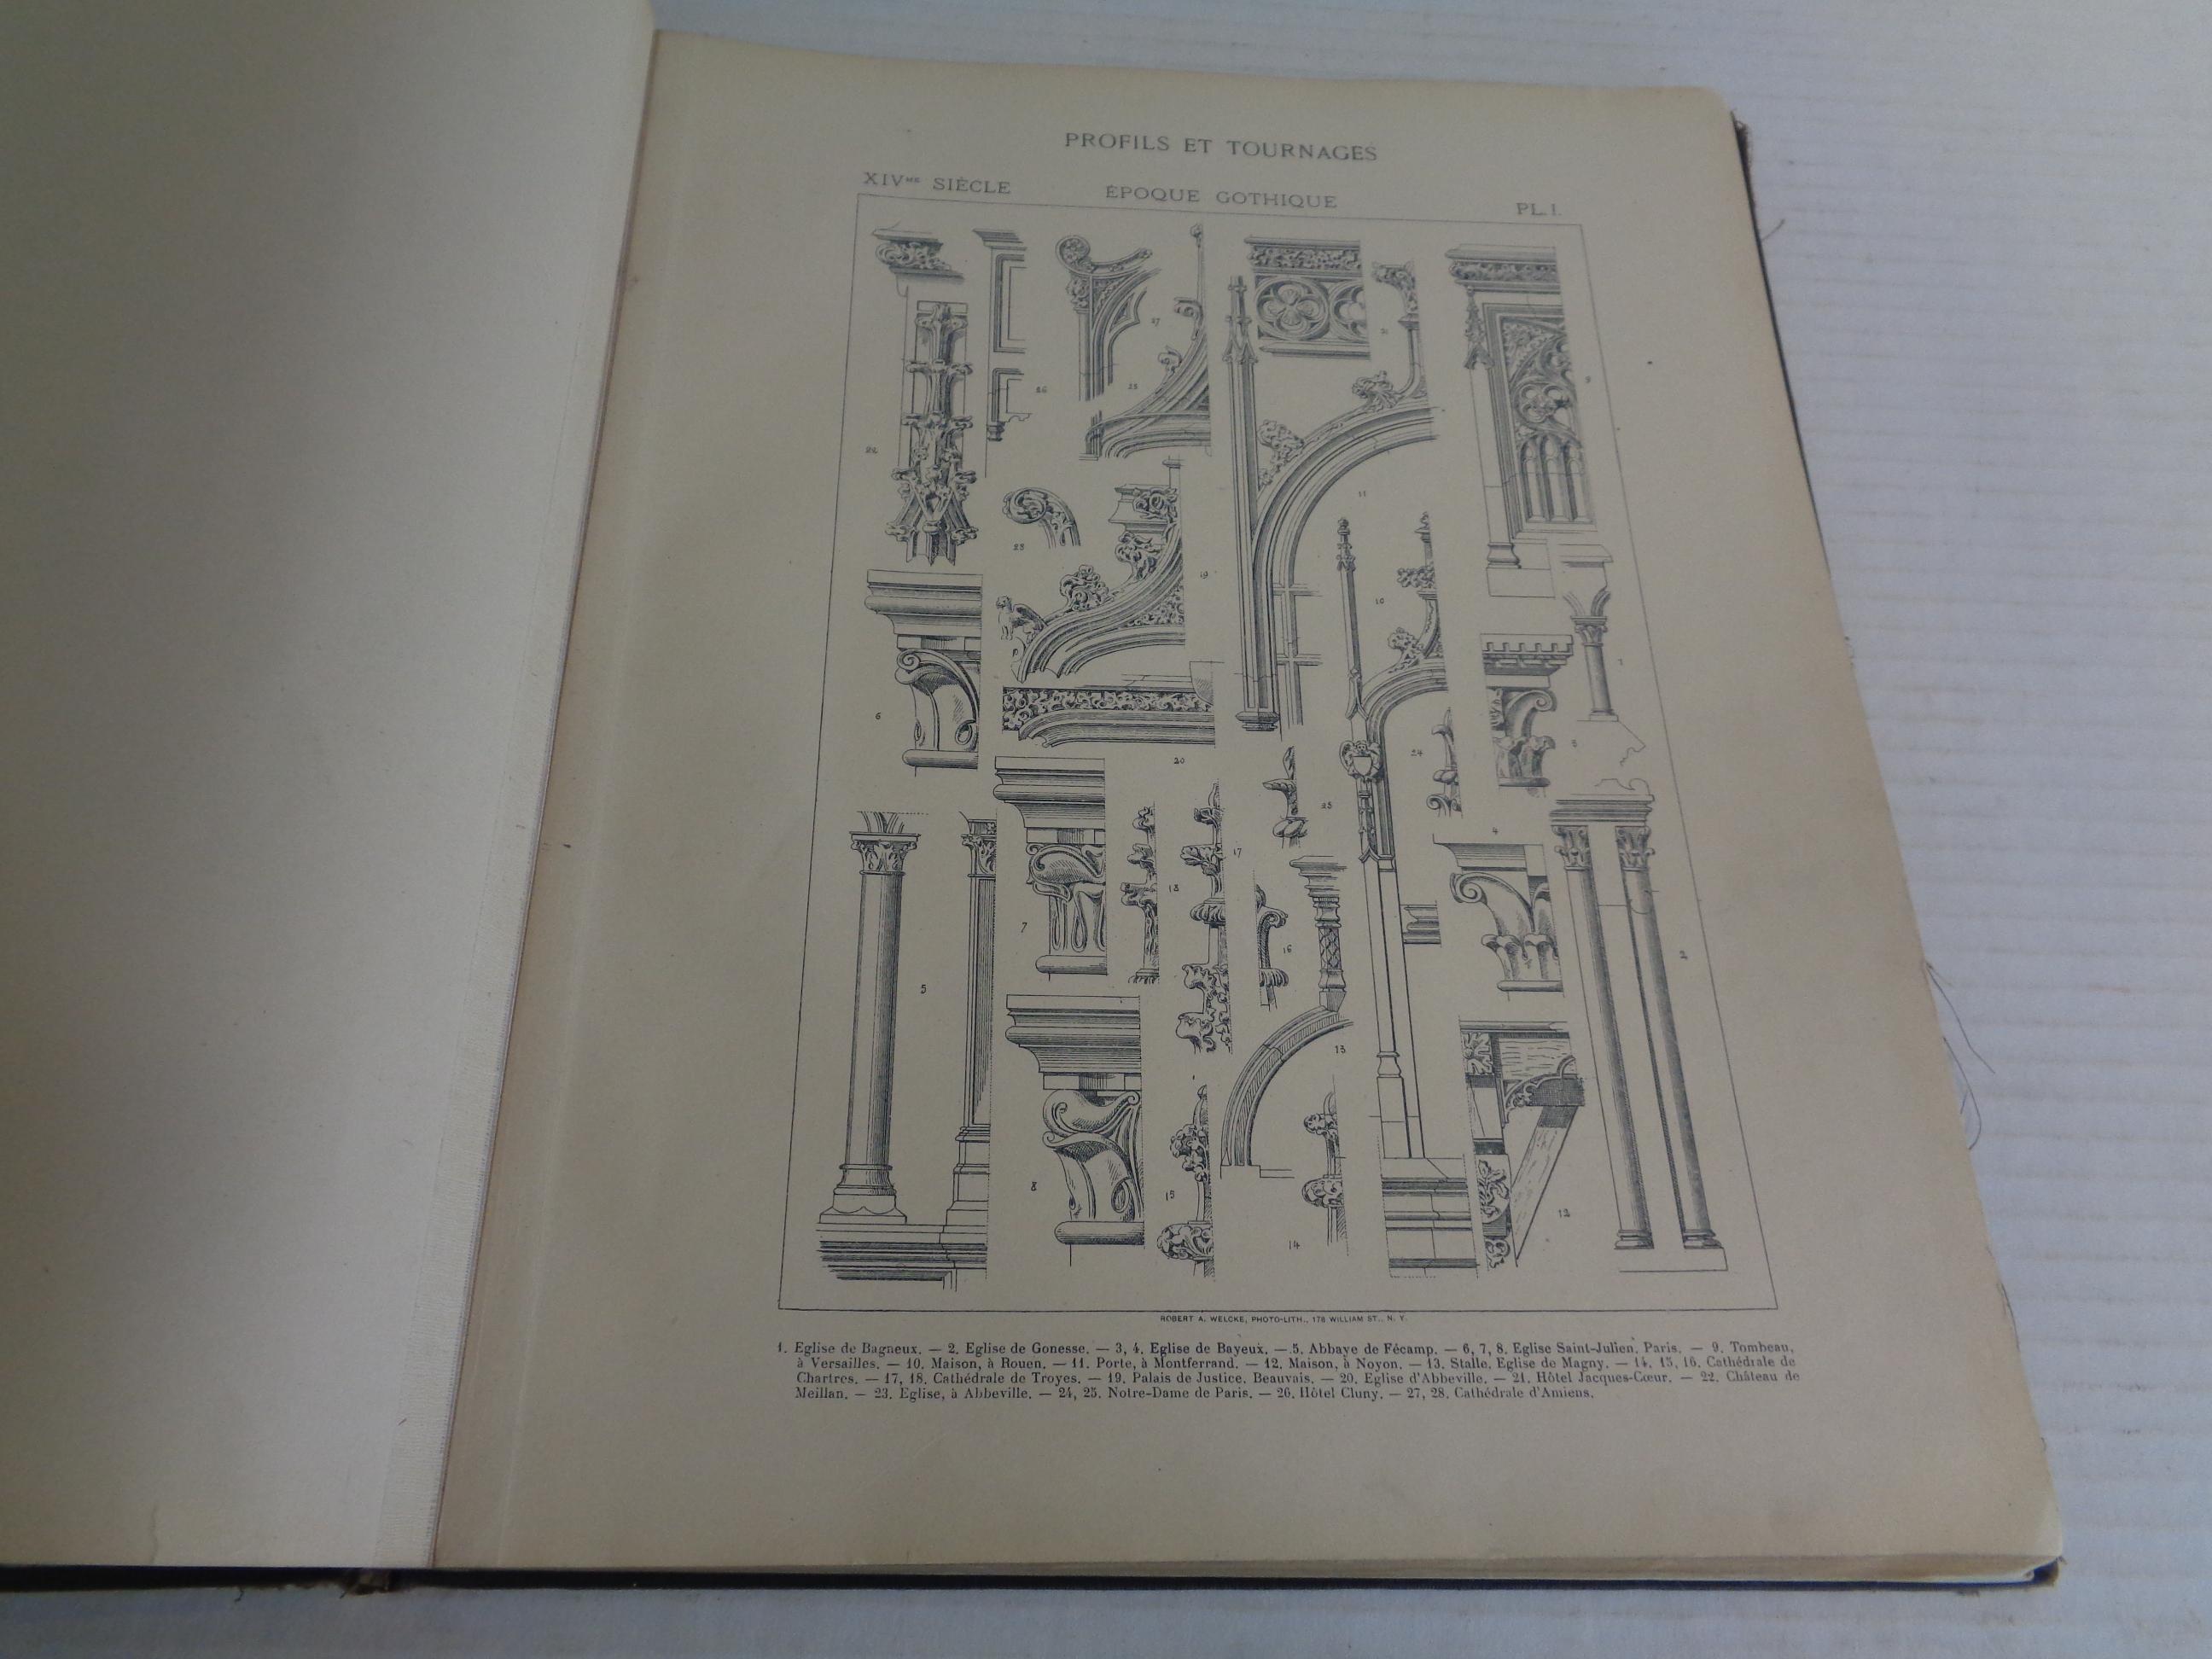  FRENCH STYLES: Furniture & Architecture - Bajot, Paris - 19th C. Folio Book In Good Condition For Sale In Rochester, NY